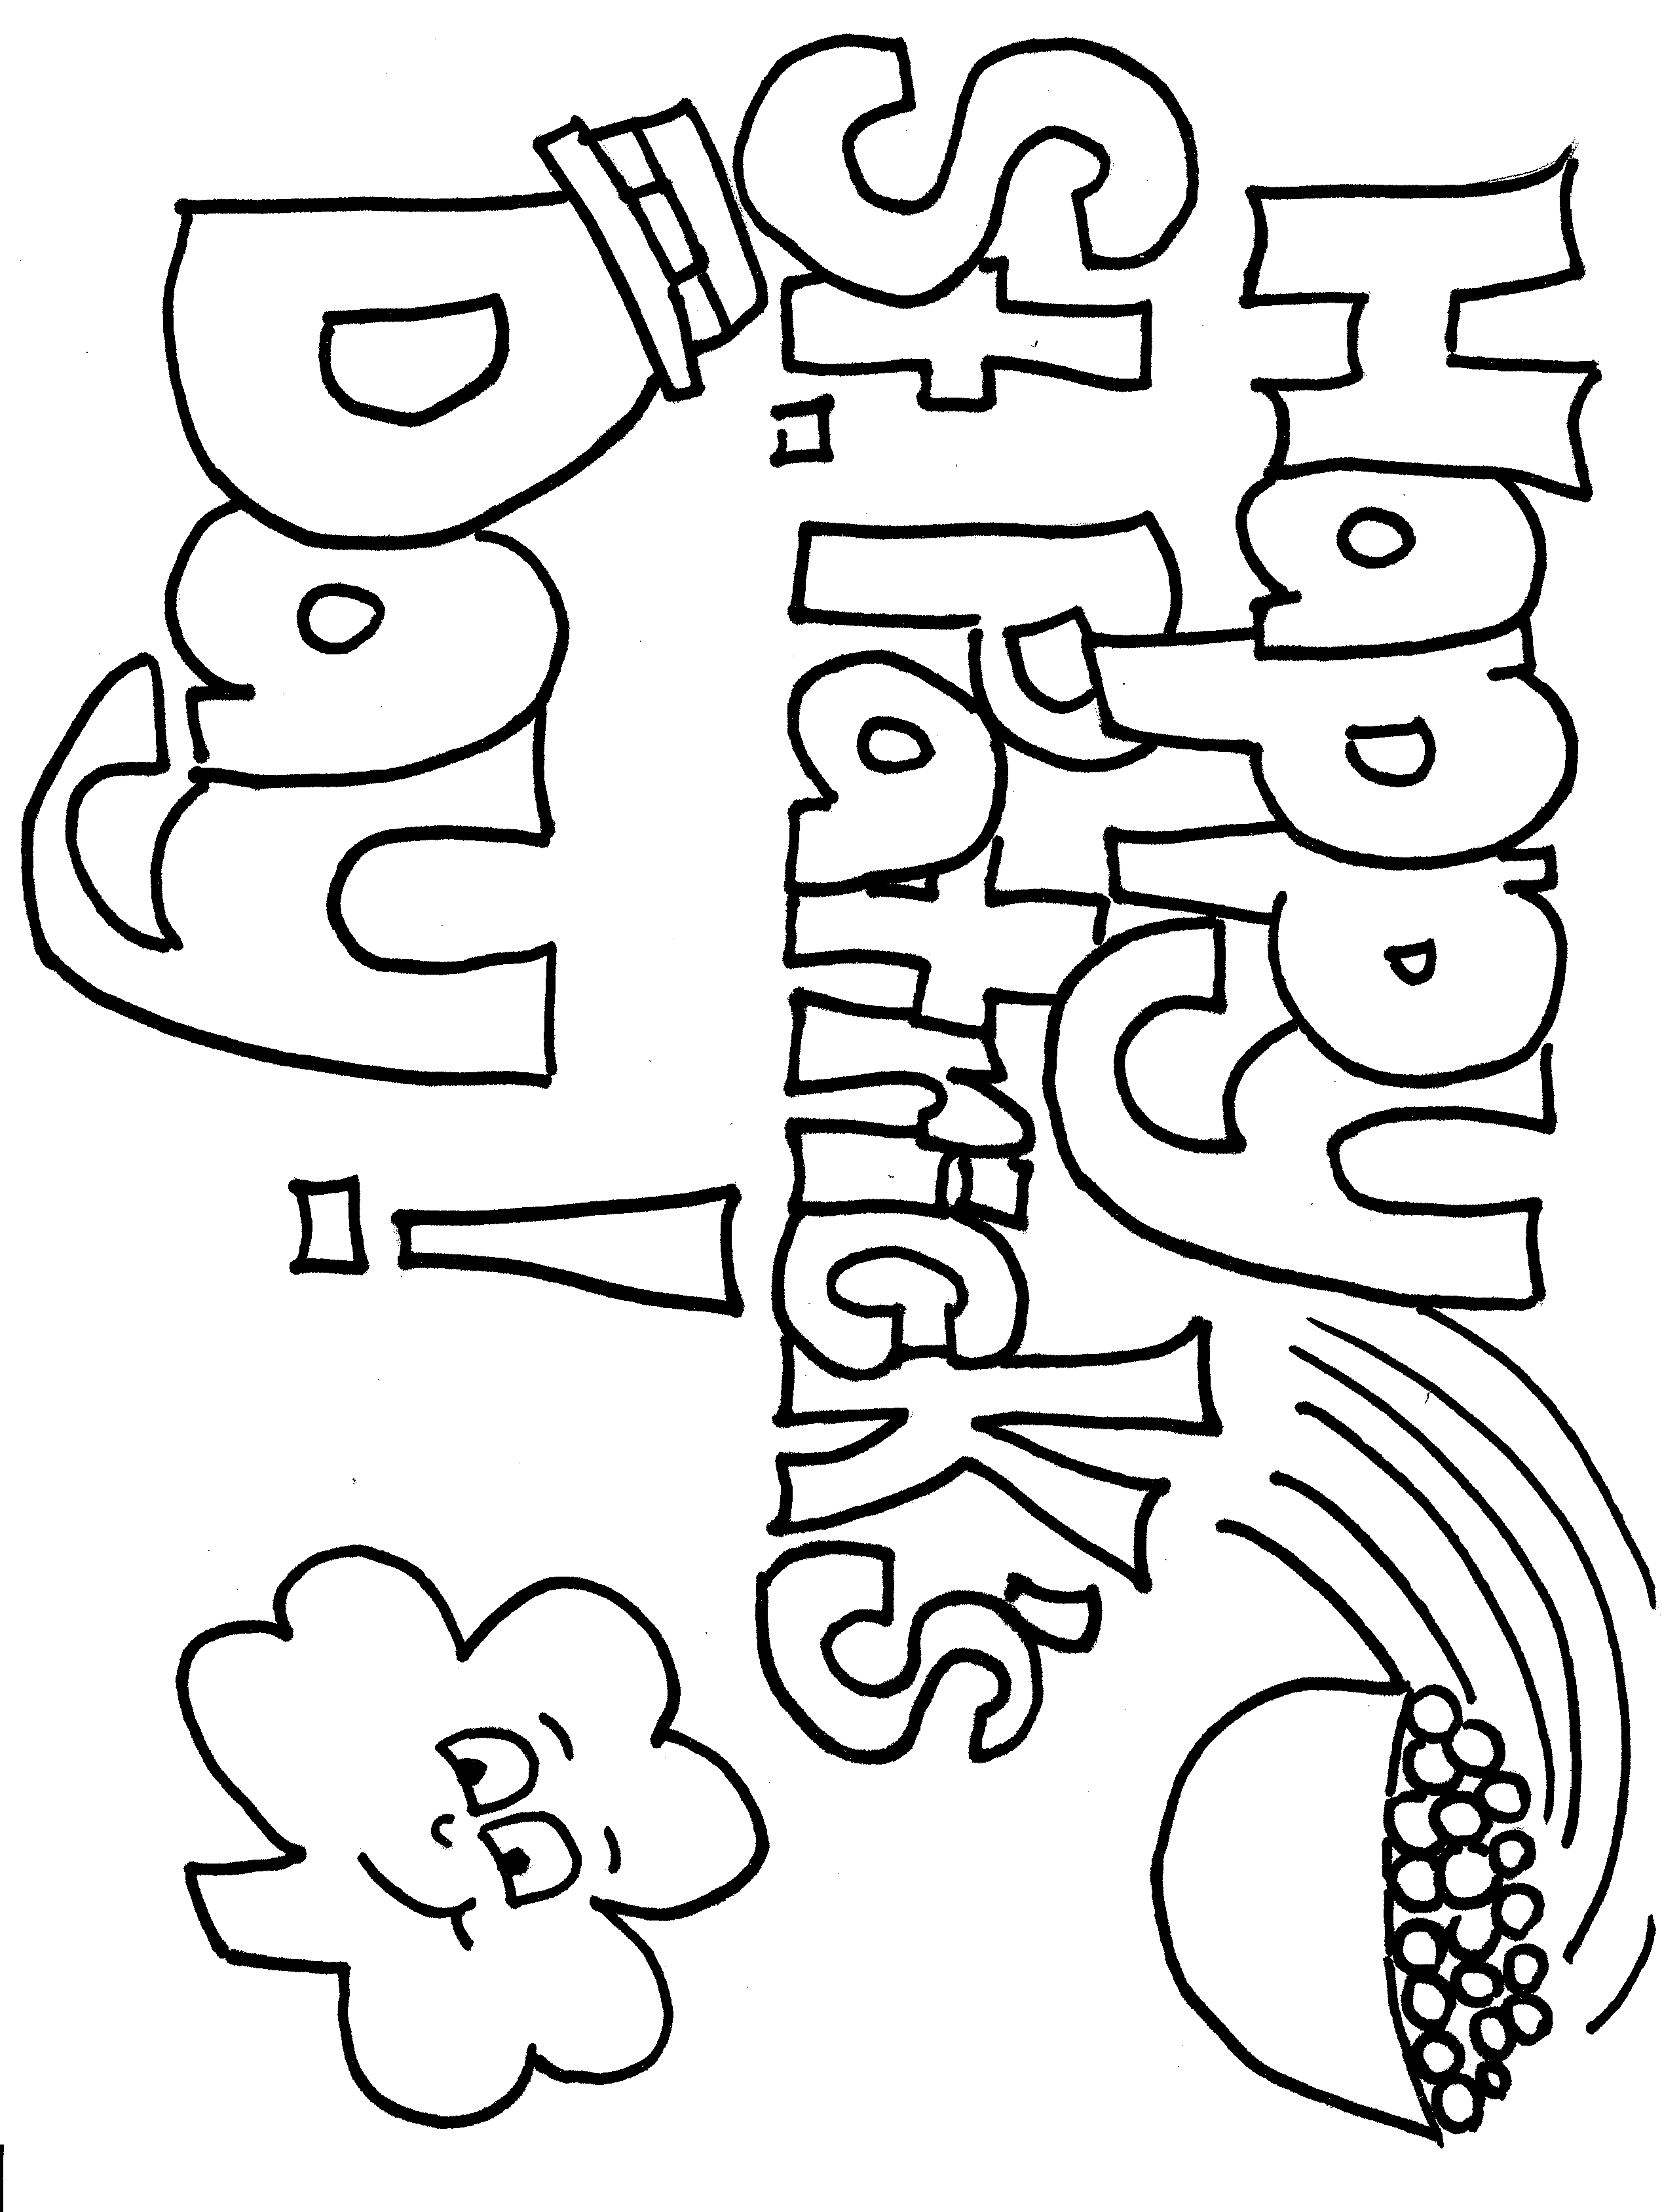 St Patrick Day Coloring Pages For Kids | Coloringpages321.Com